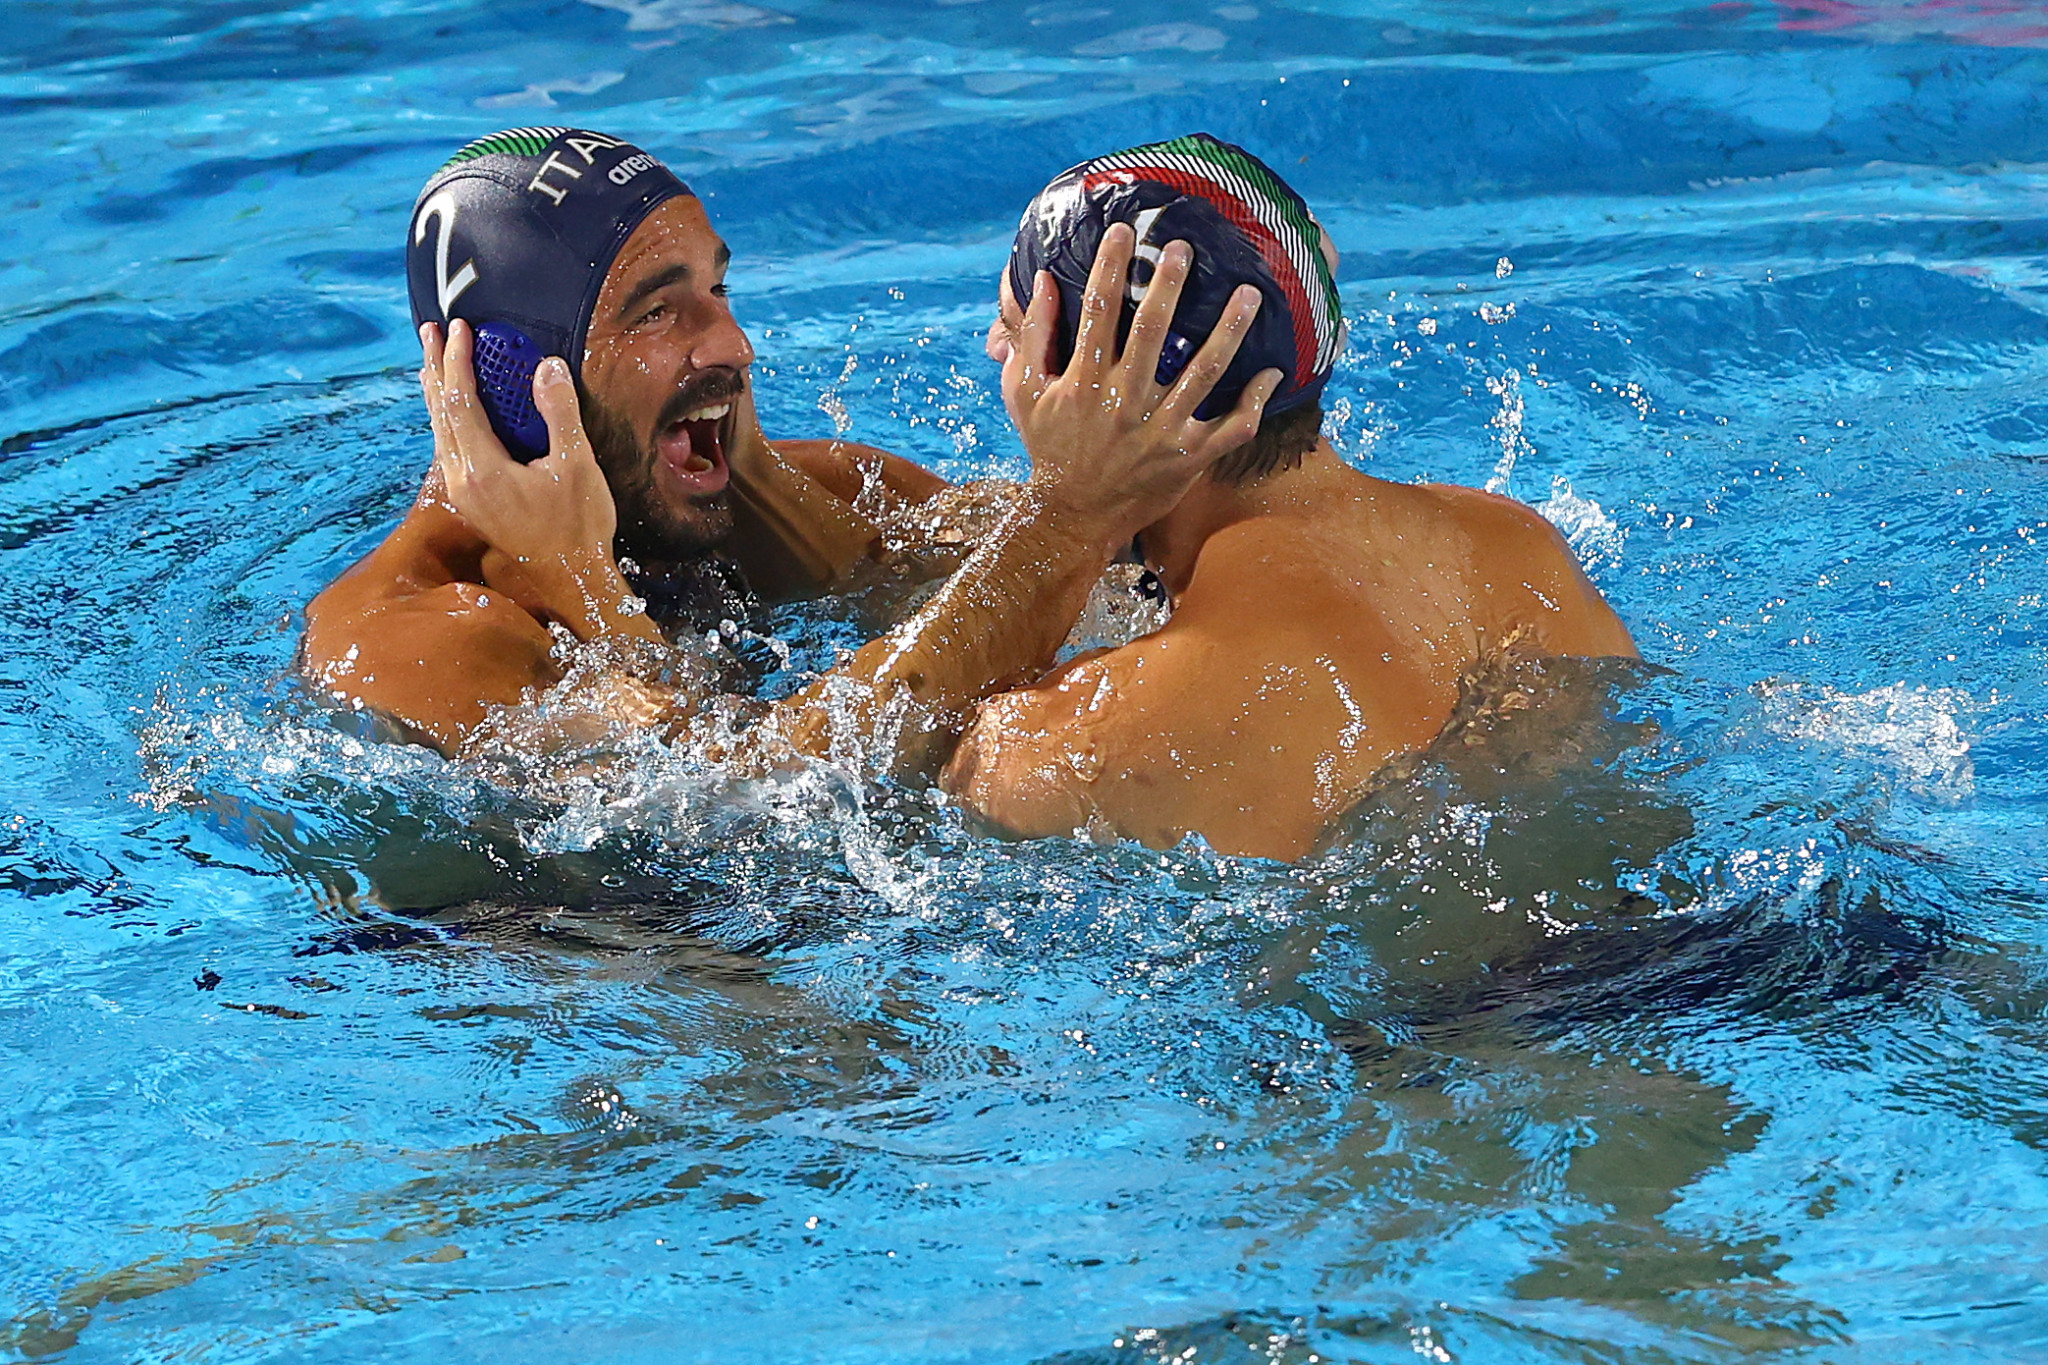 Italy beat US to claim first FINA Men's Water Polo World League title in Strasbourg